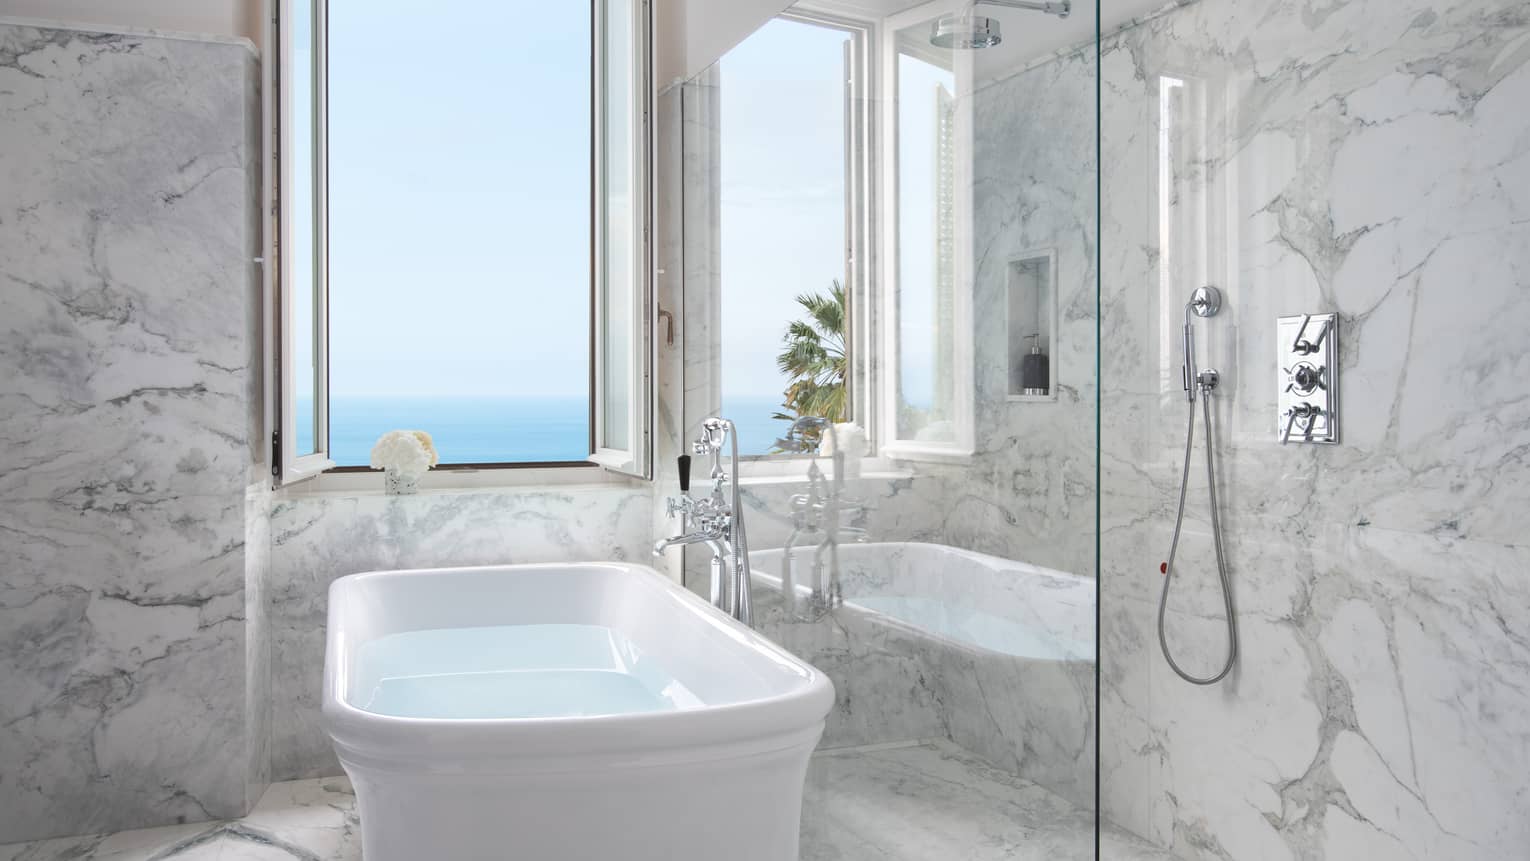 Bathroom with marble walls and floor, free-standing white tub facing sea-view window